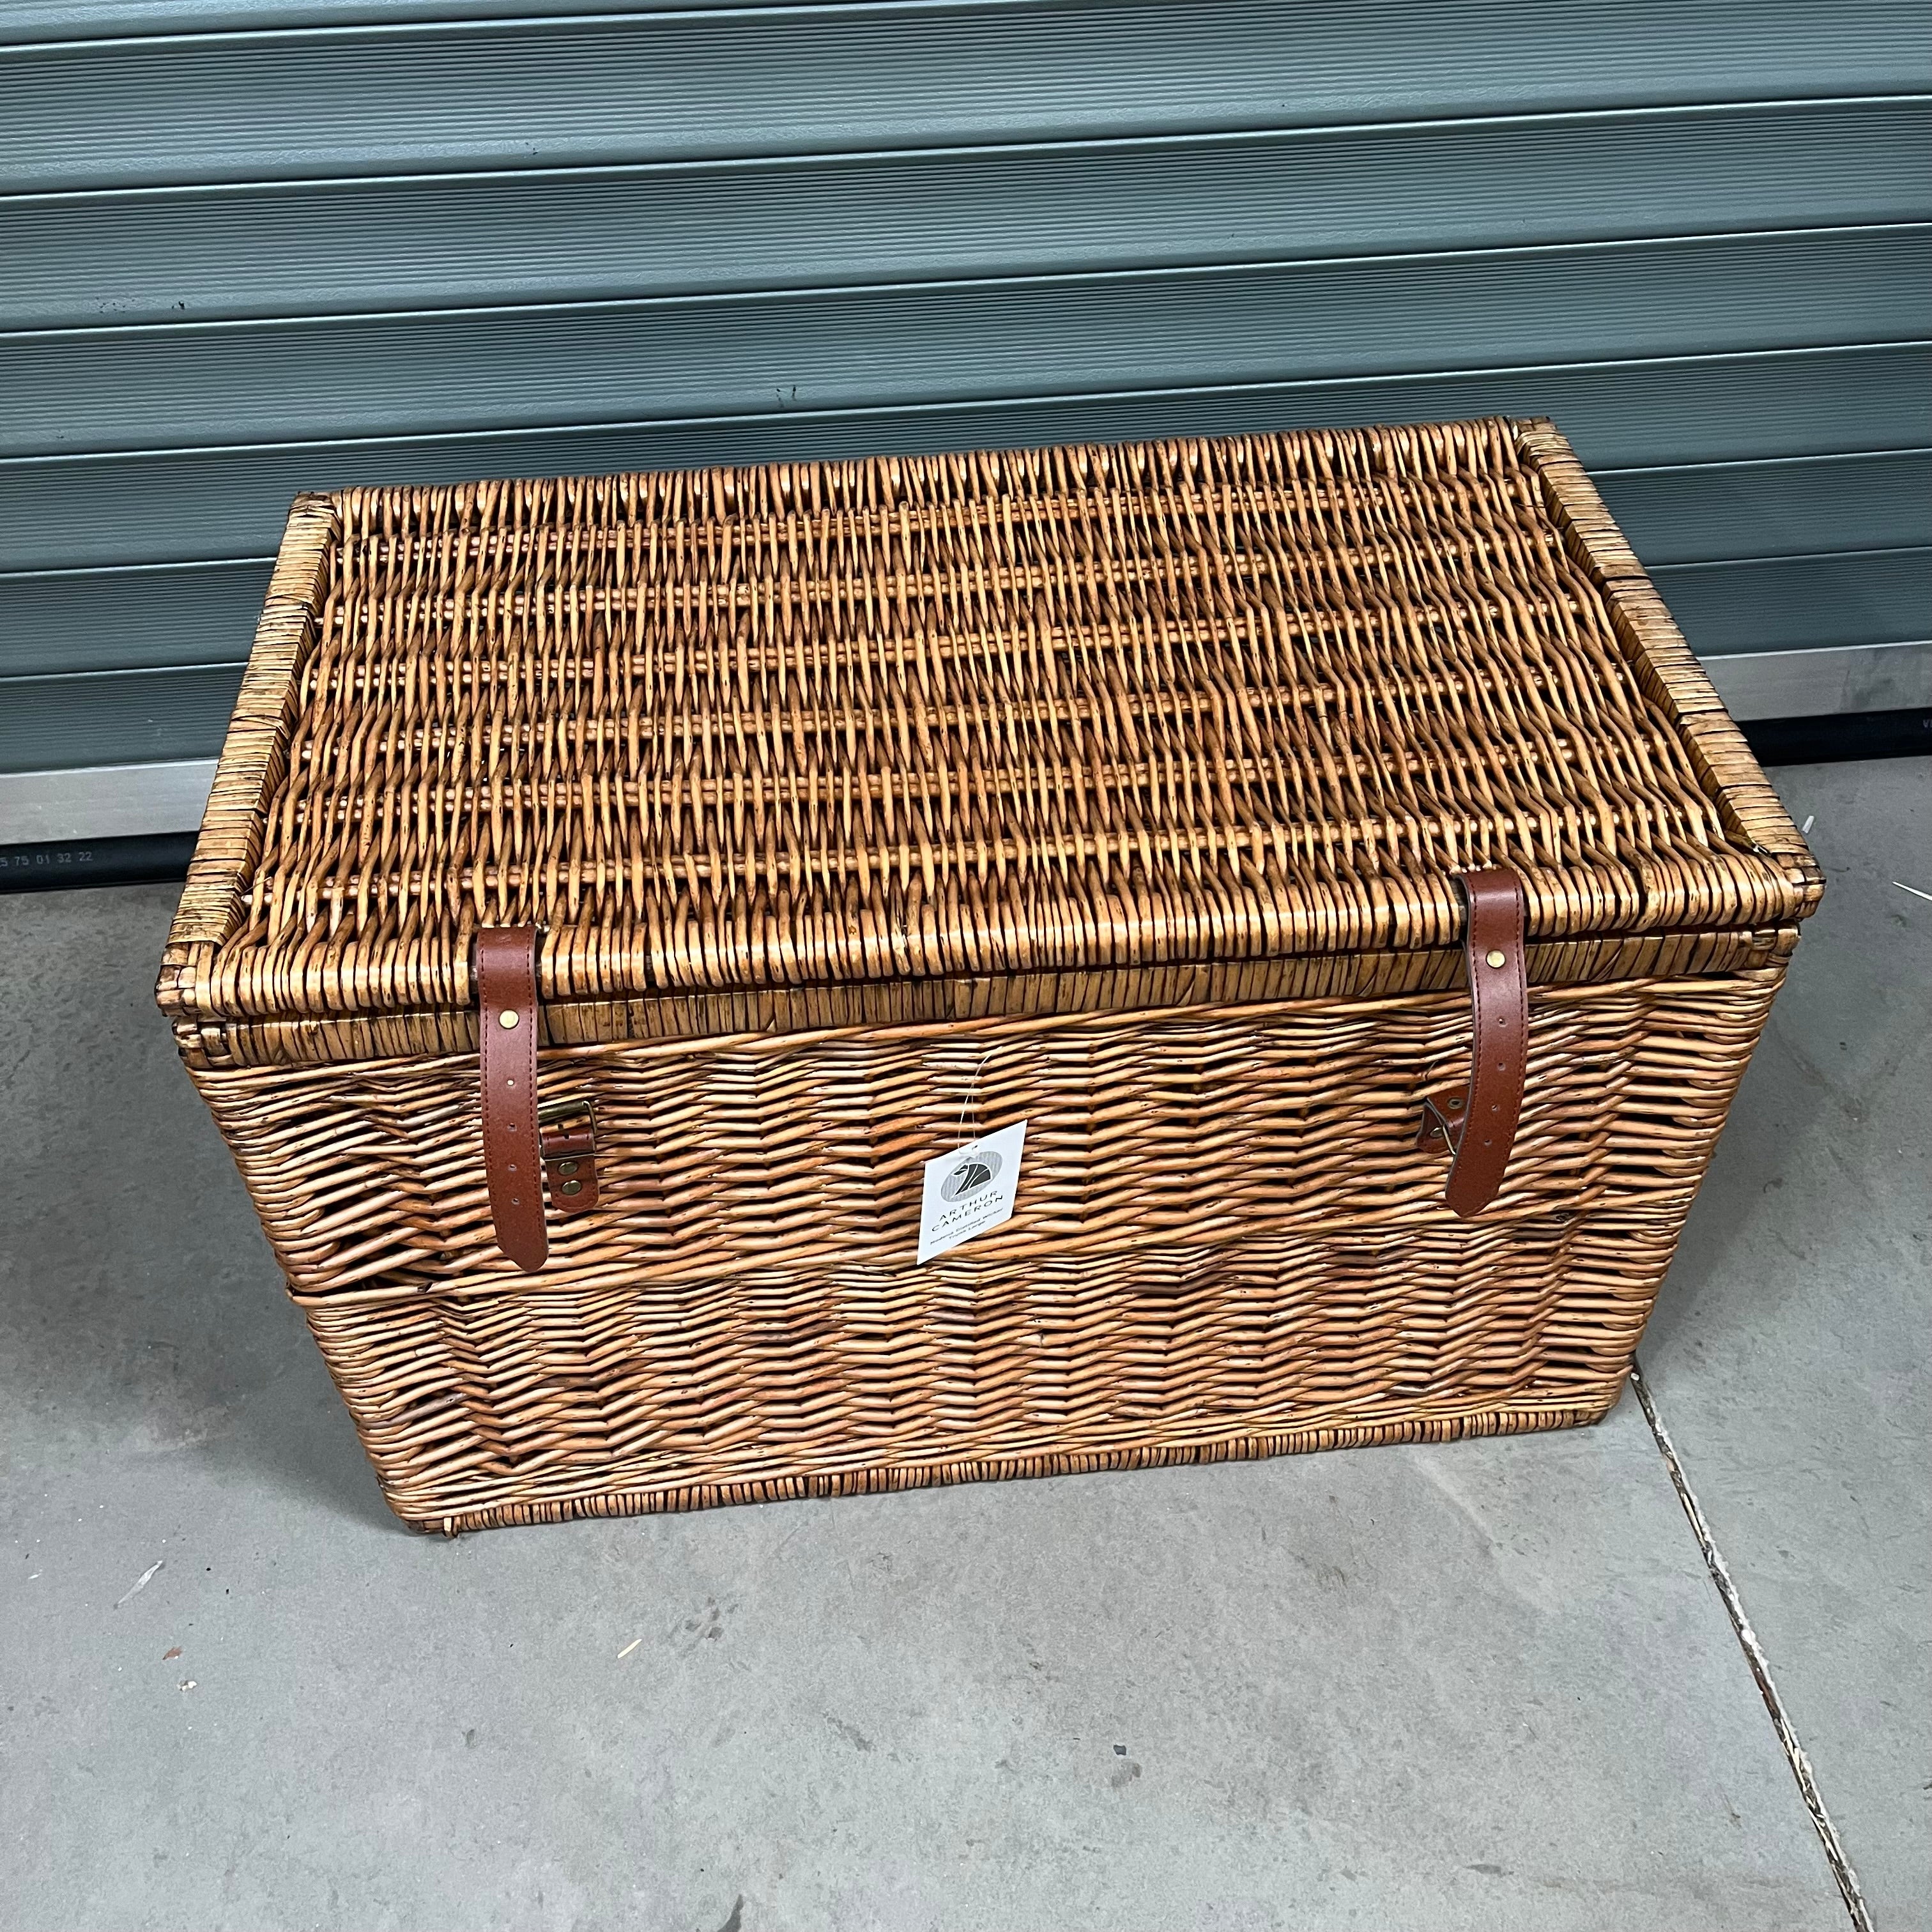 Distilled Brown Modena Wicker Storage Trunk Large - 2nds Lot 103